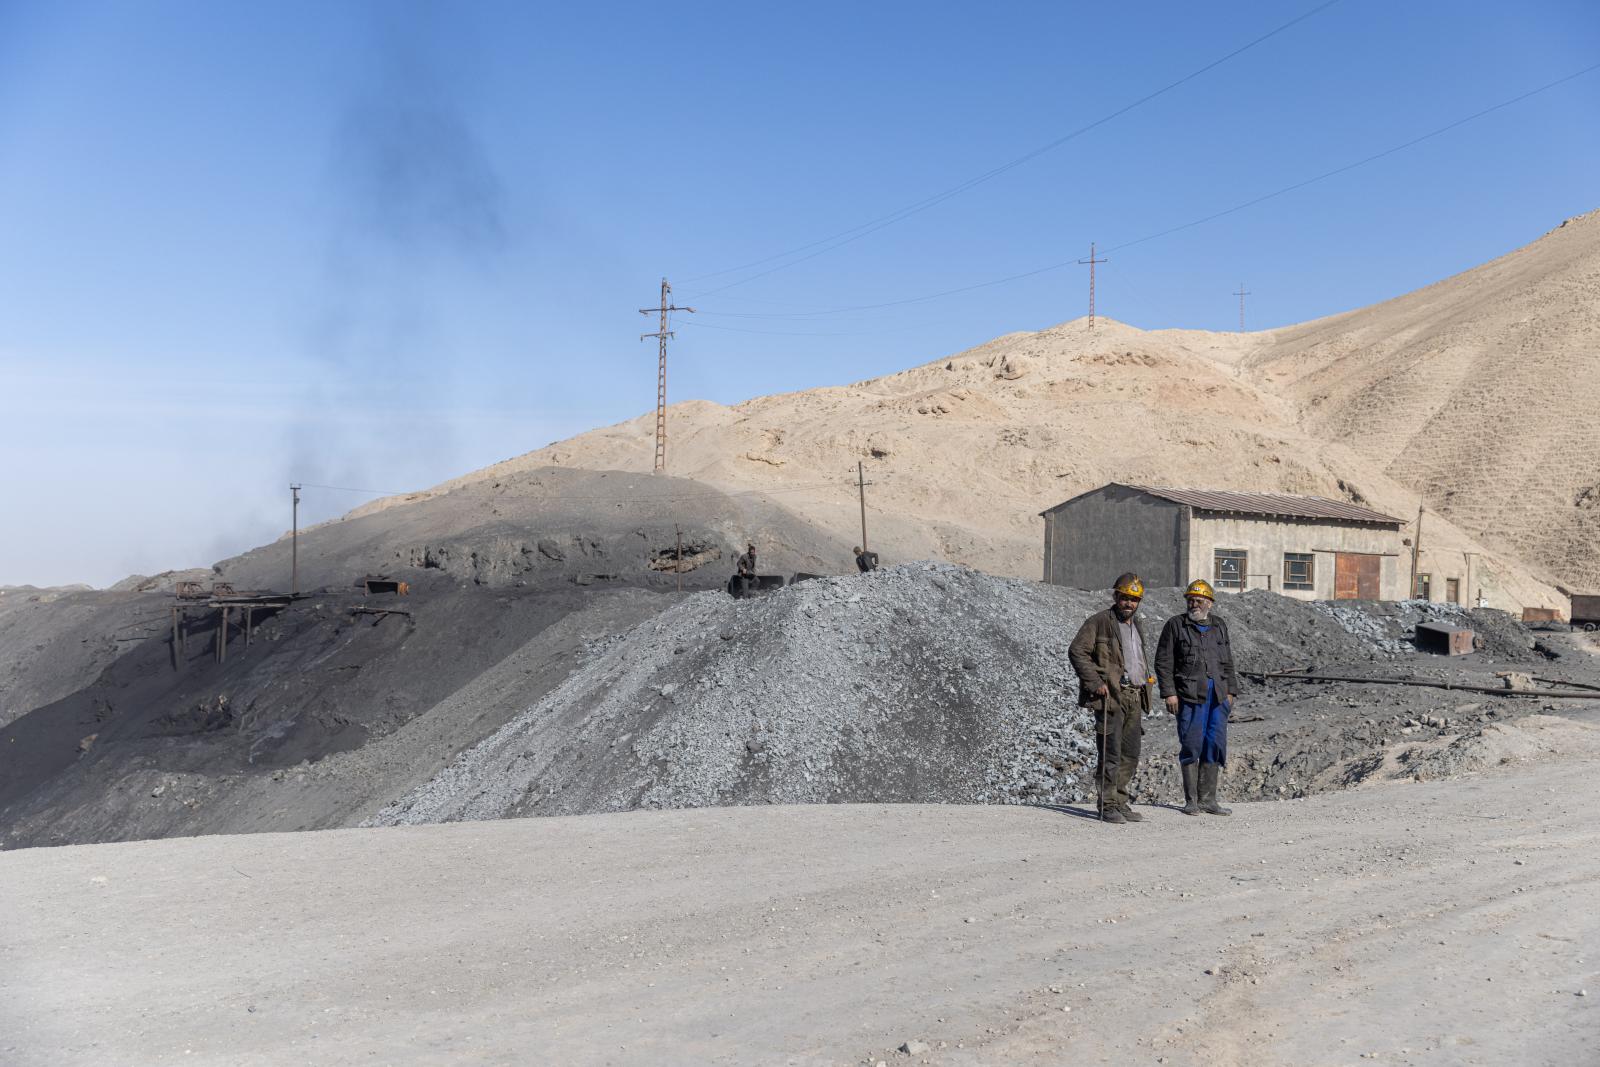 Mines of Afghanistan | Buy this image